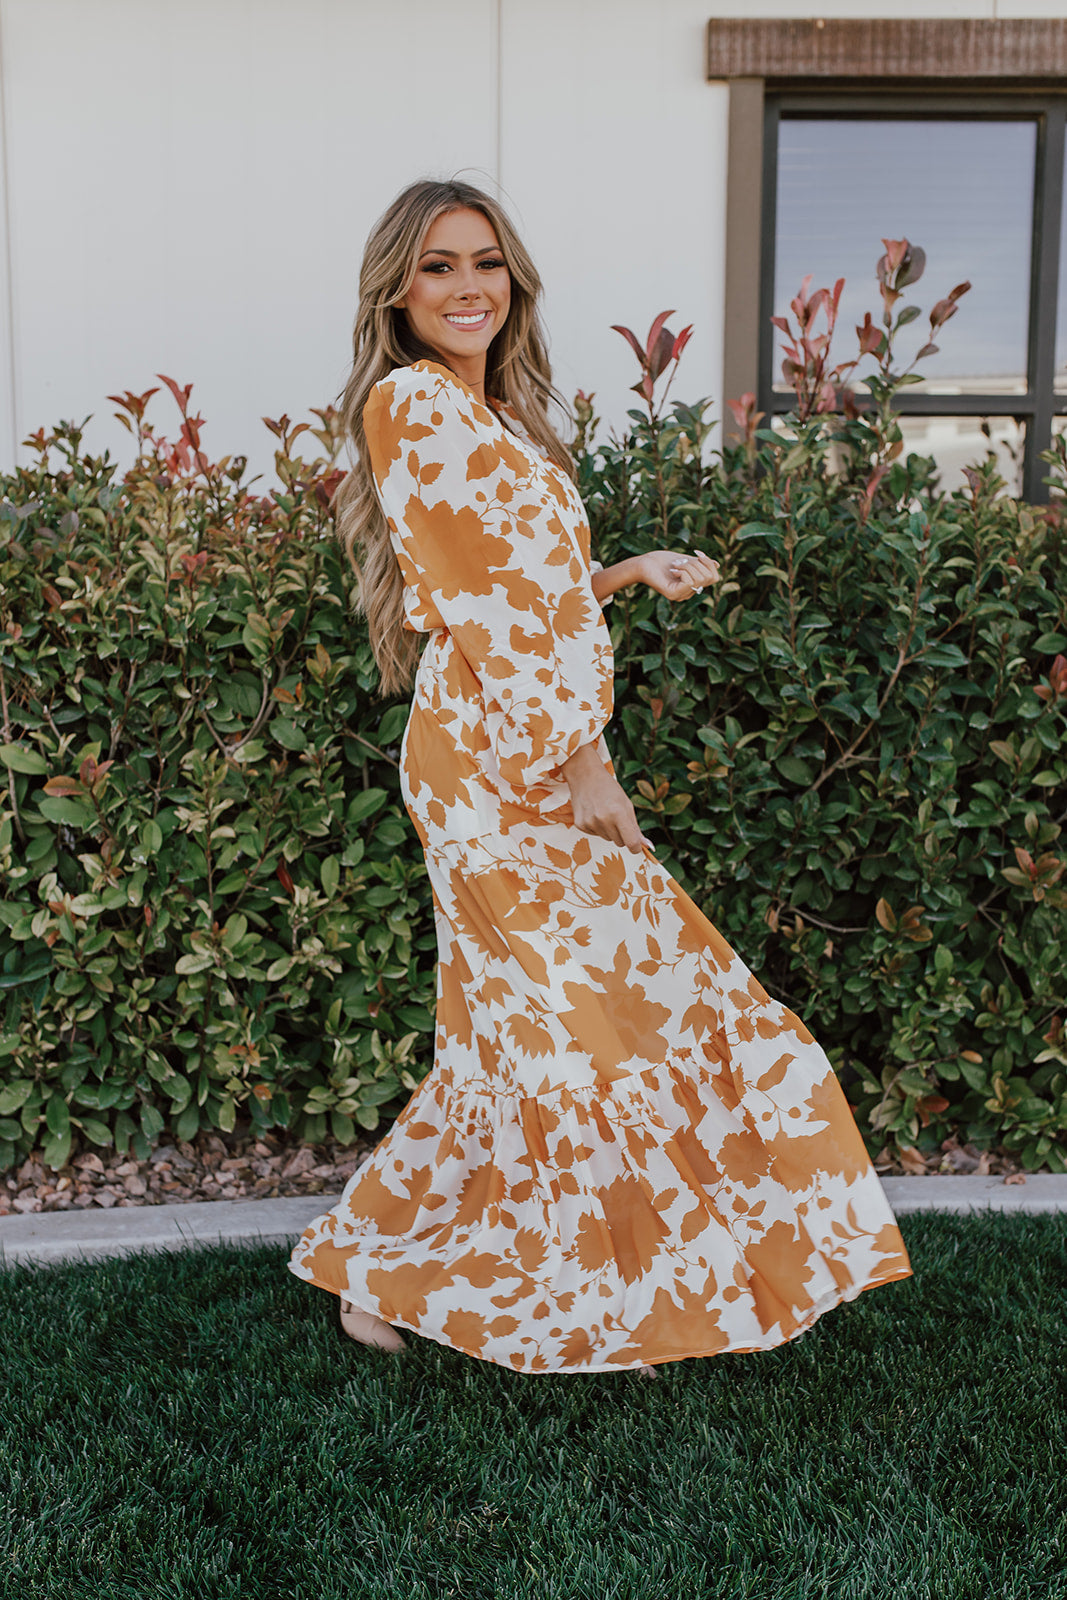 THE ORCHARD HARVEST MAXI DRESS IN ORANGE